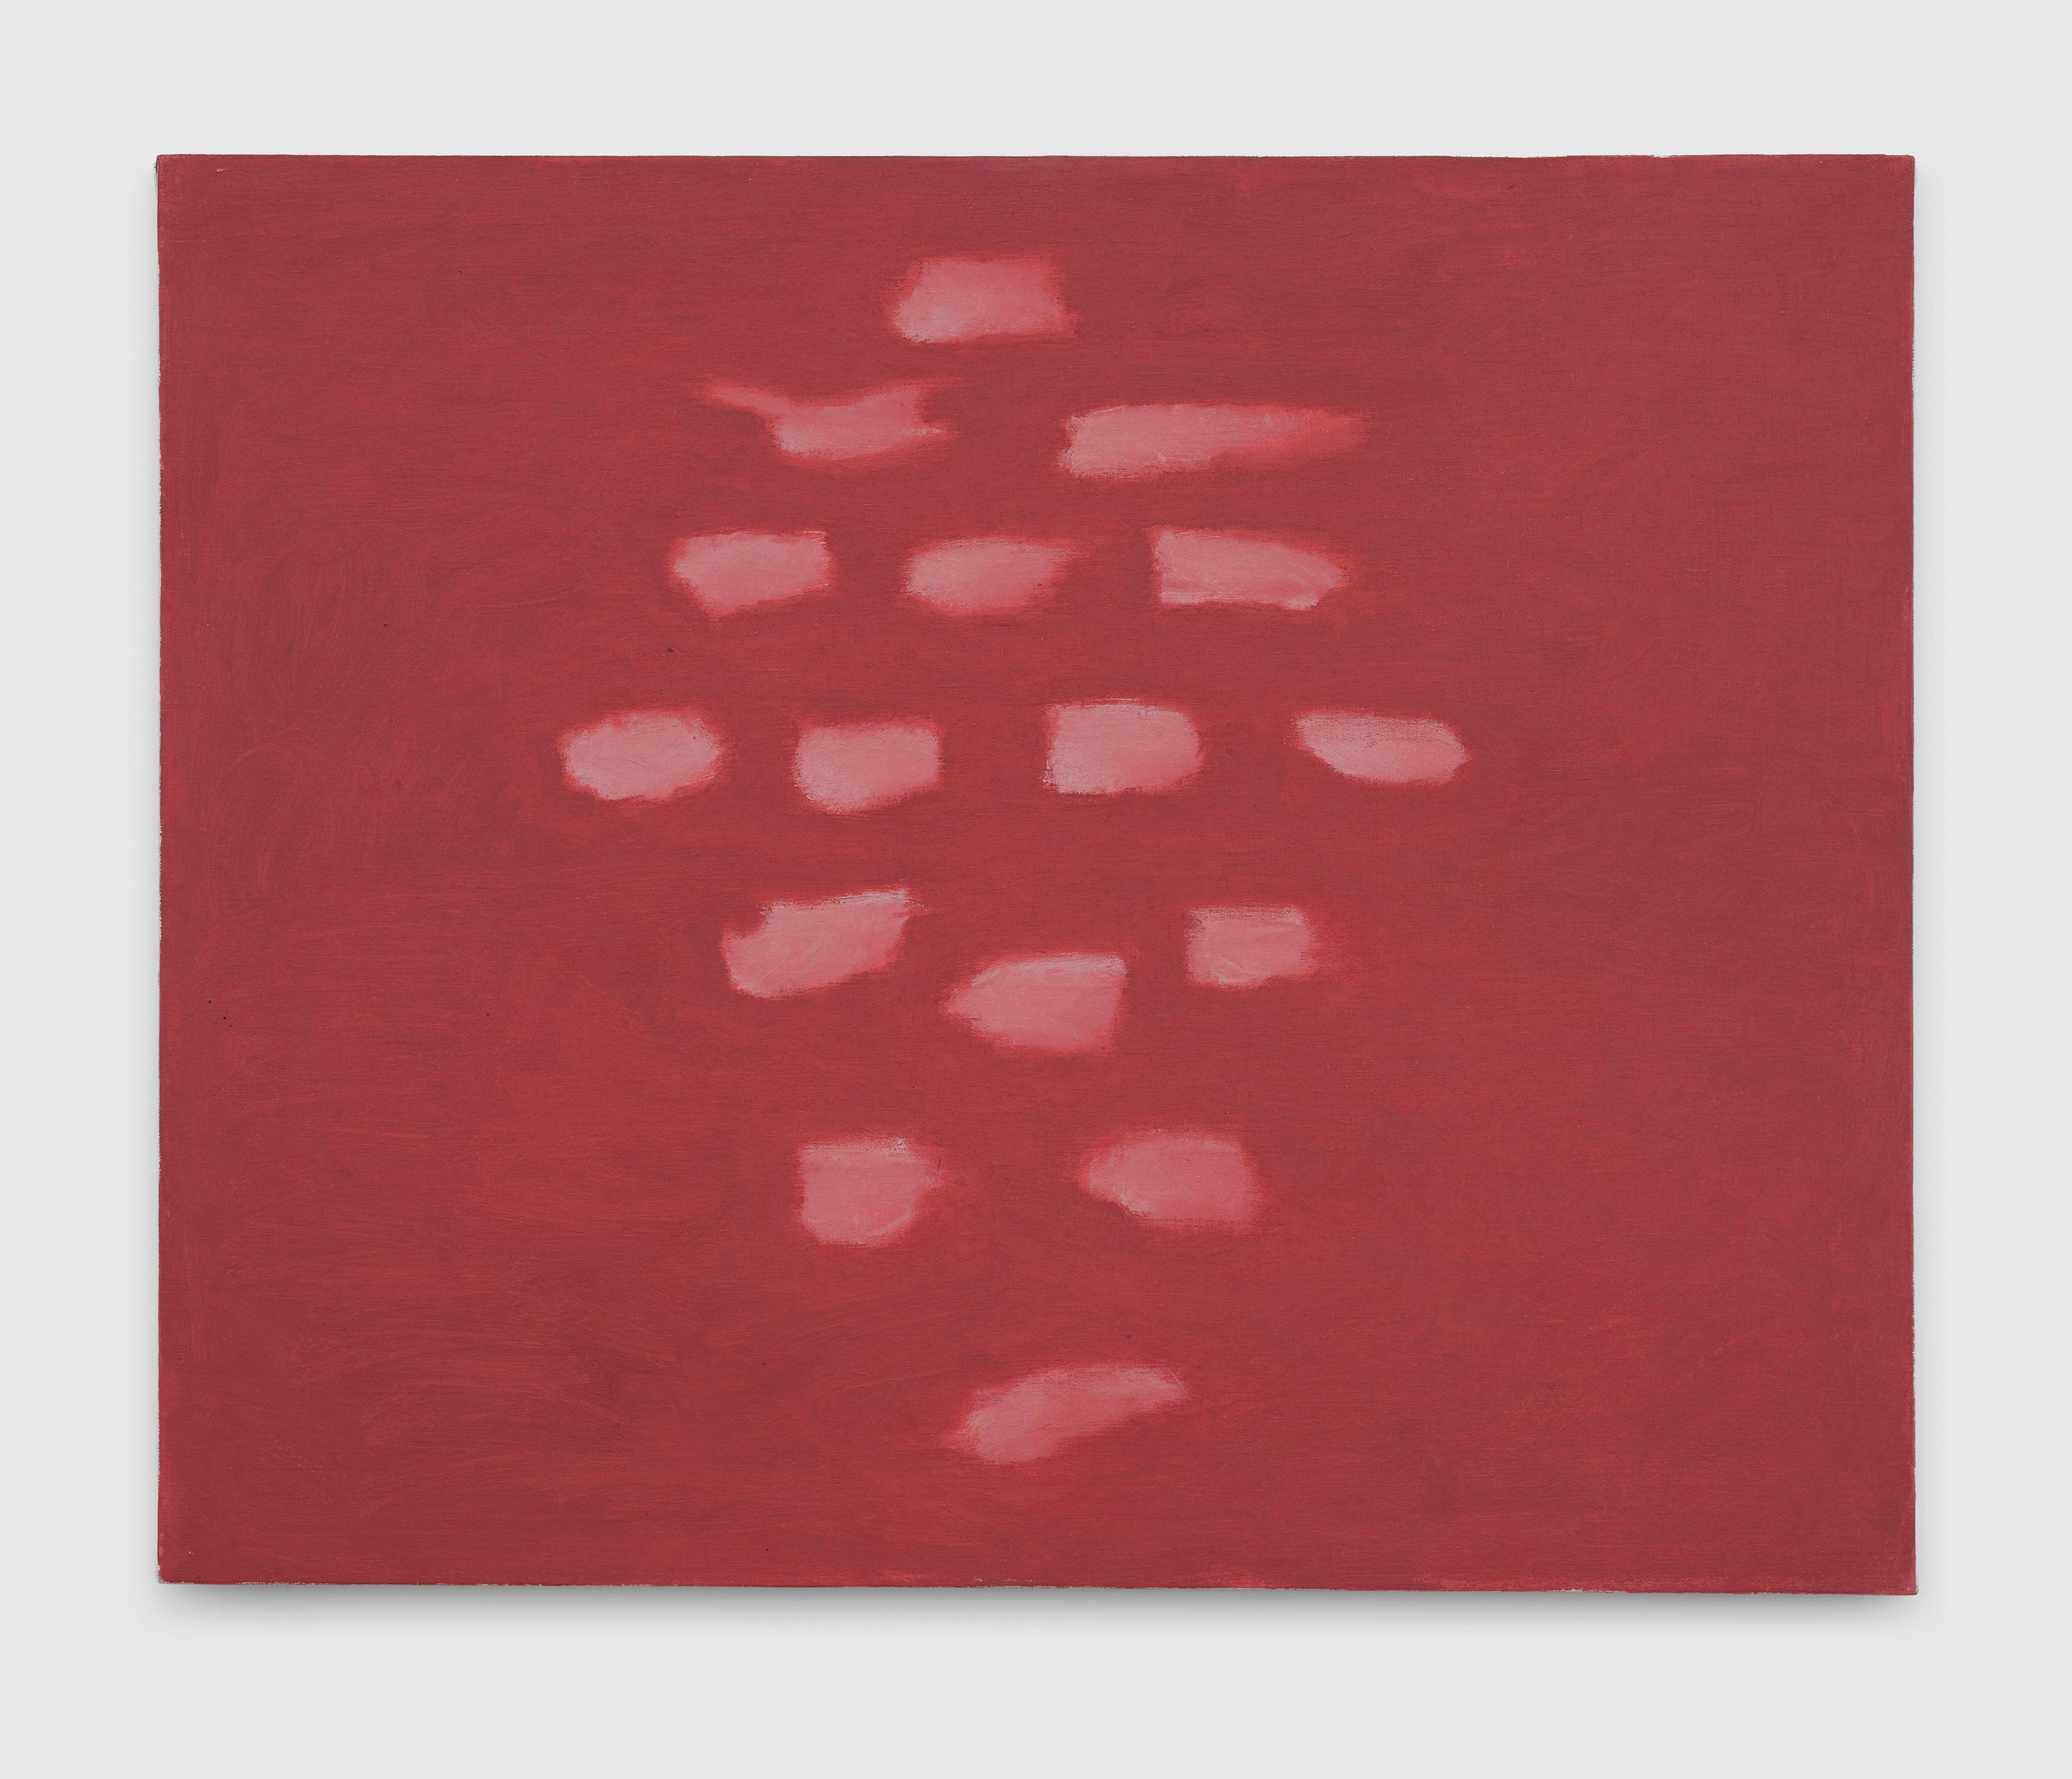 A painting by Raoul De Keyser, called Untitled (Blurs), dated 1995.